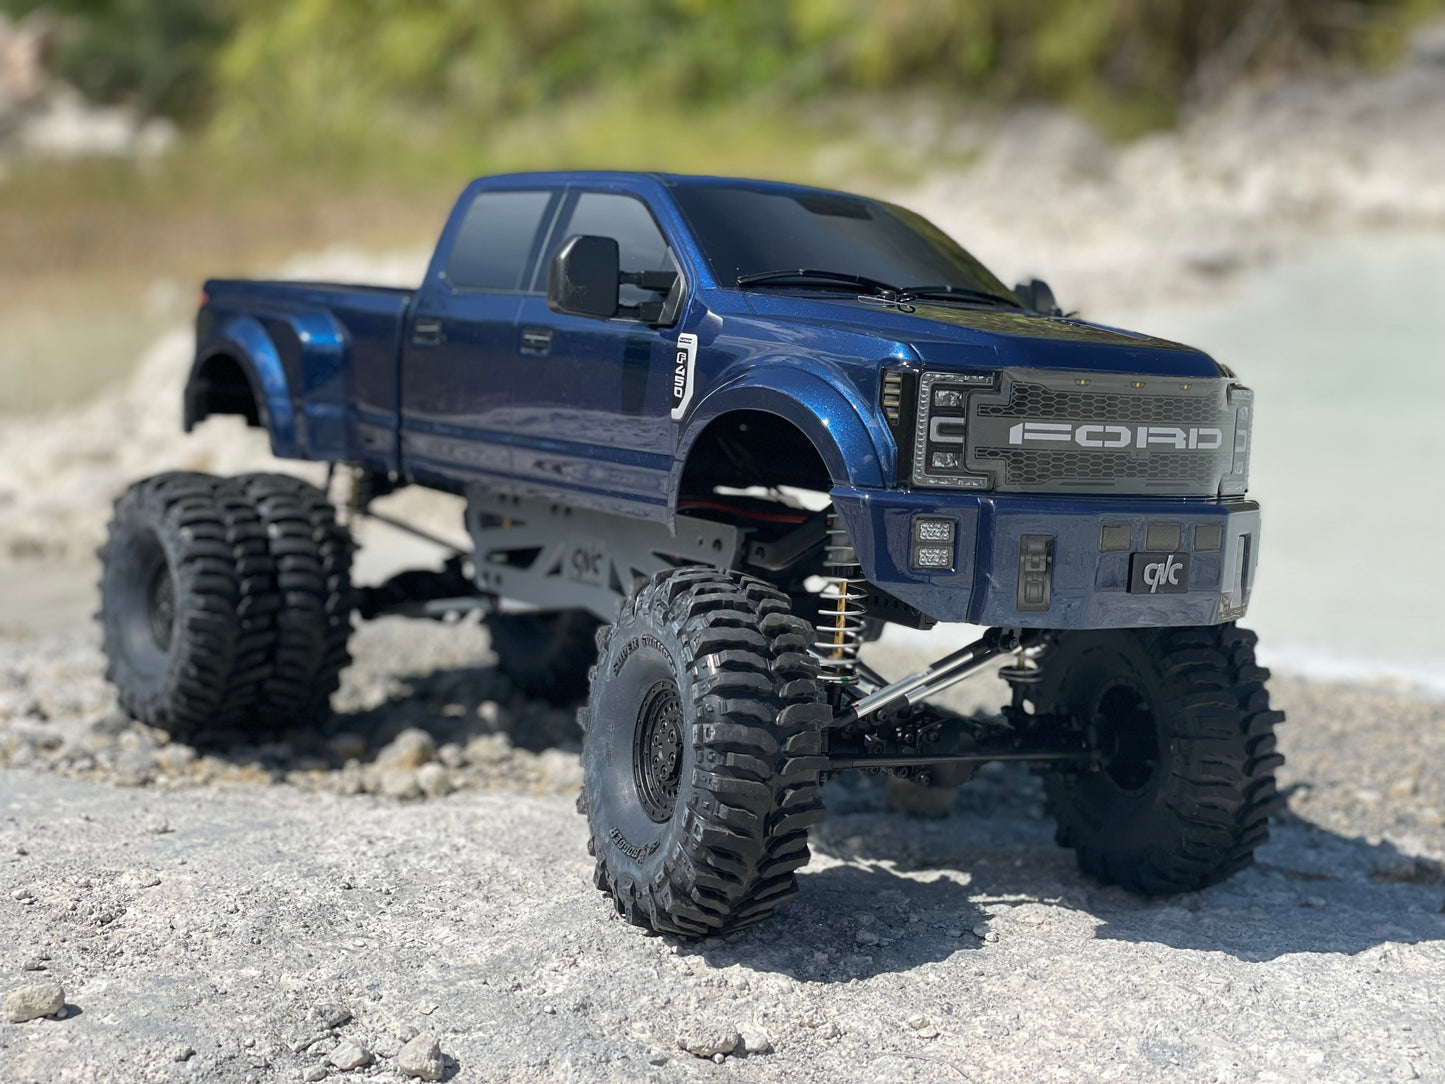 Original 40mm Lift Kit for CEN F450 (truck not included) FREE Scale Exhaust Tip Included.